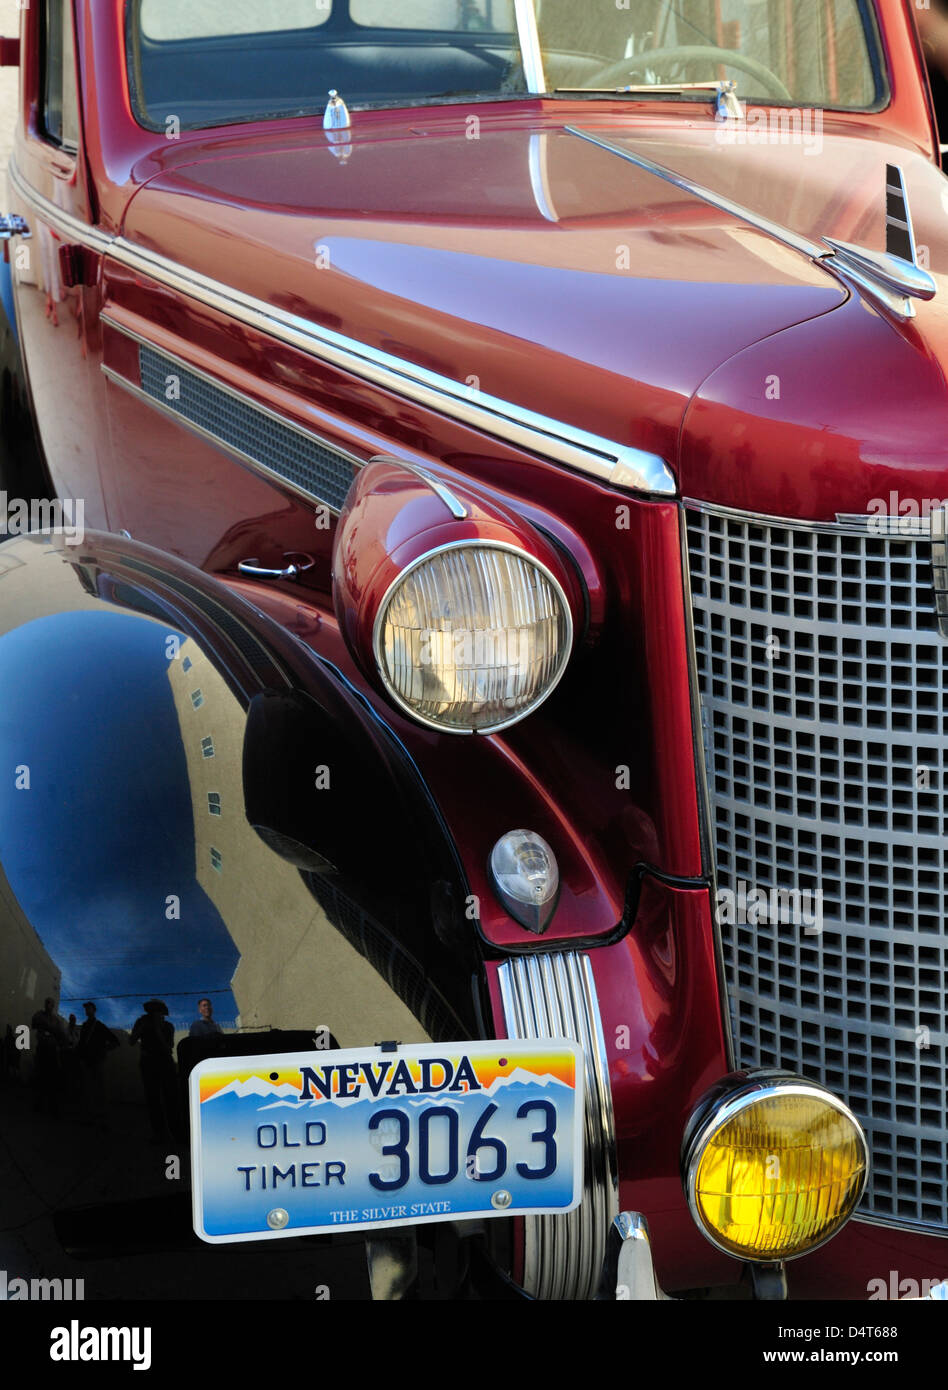 Historic Oldsmobile with Nevada 'Old Timer' license plate believed to date from 1937 Stock Photo